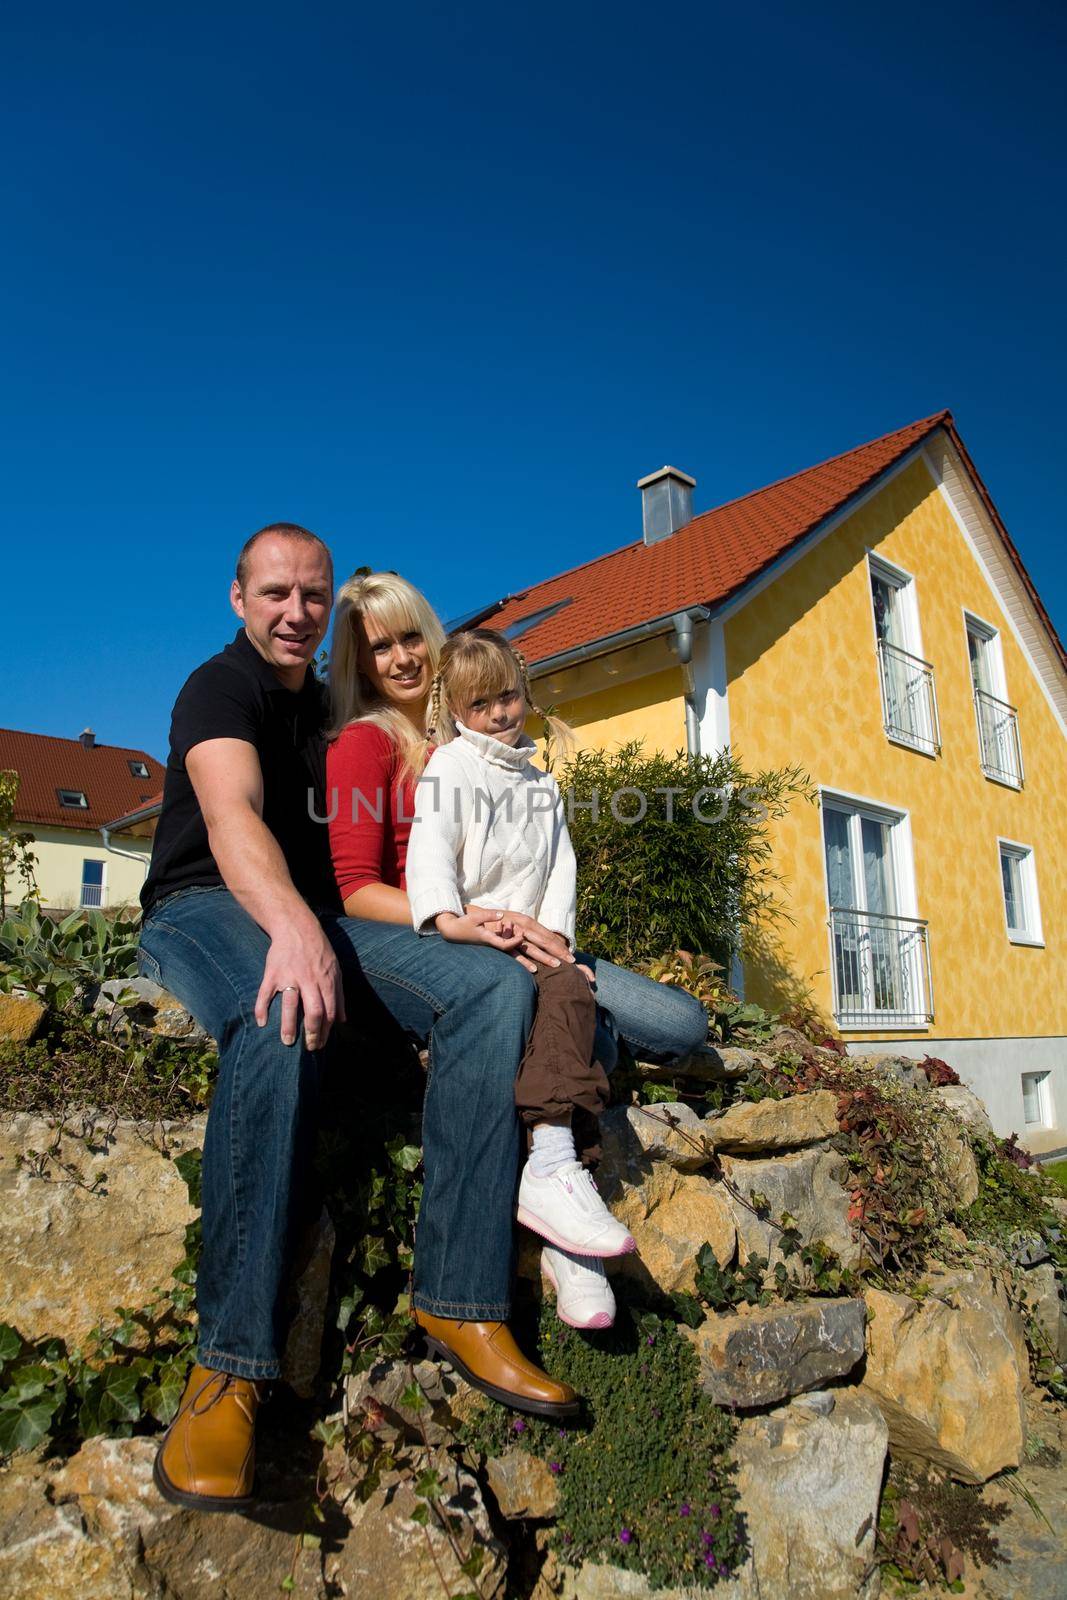 A young couple with their daughter sitting in front of their yellow home